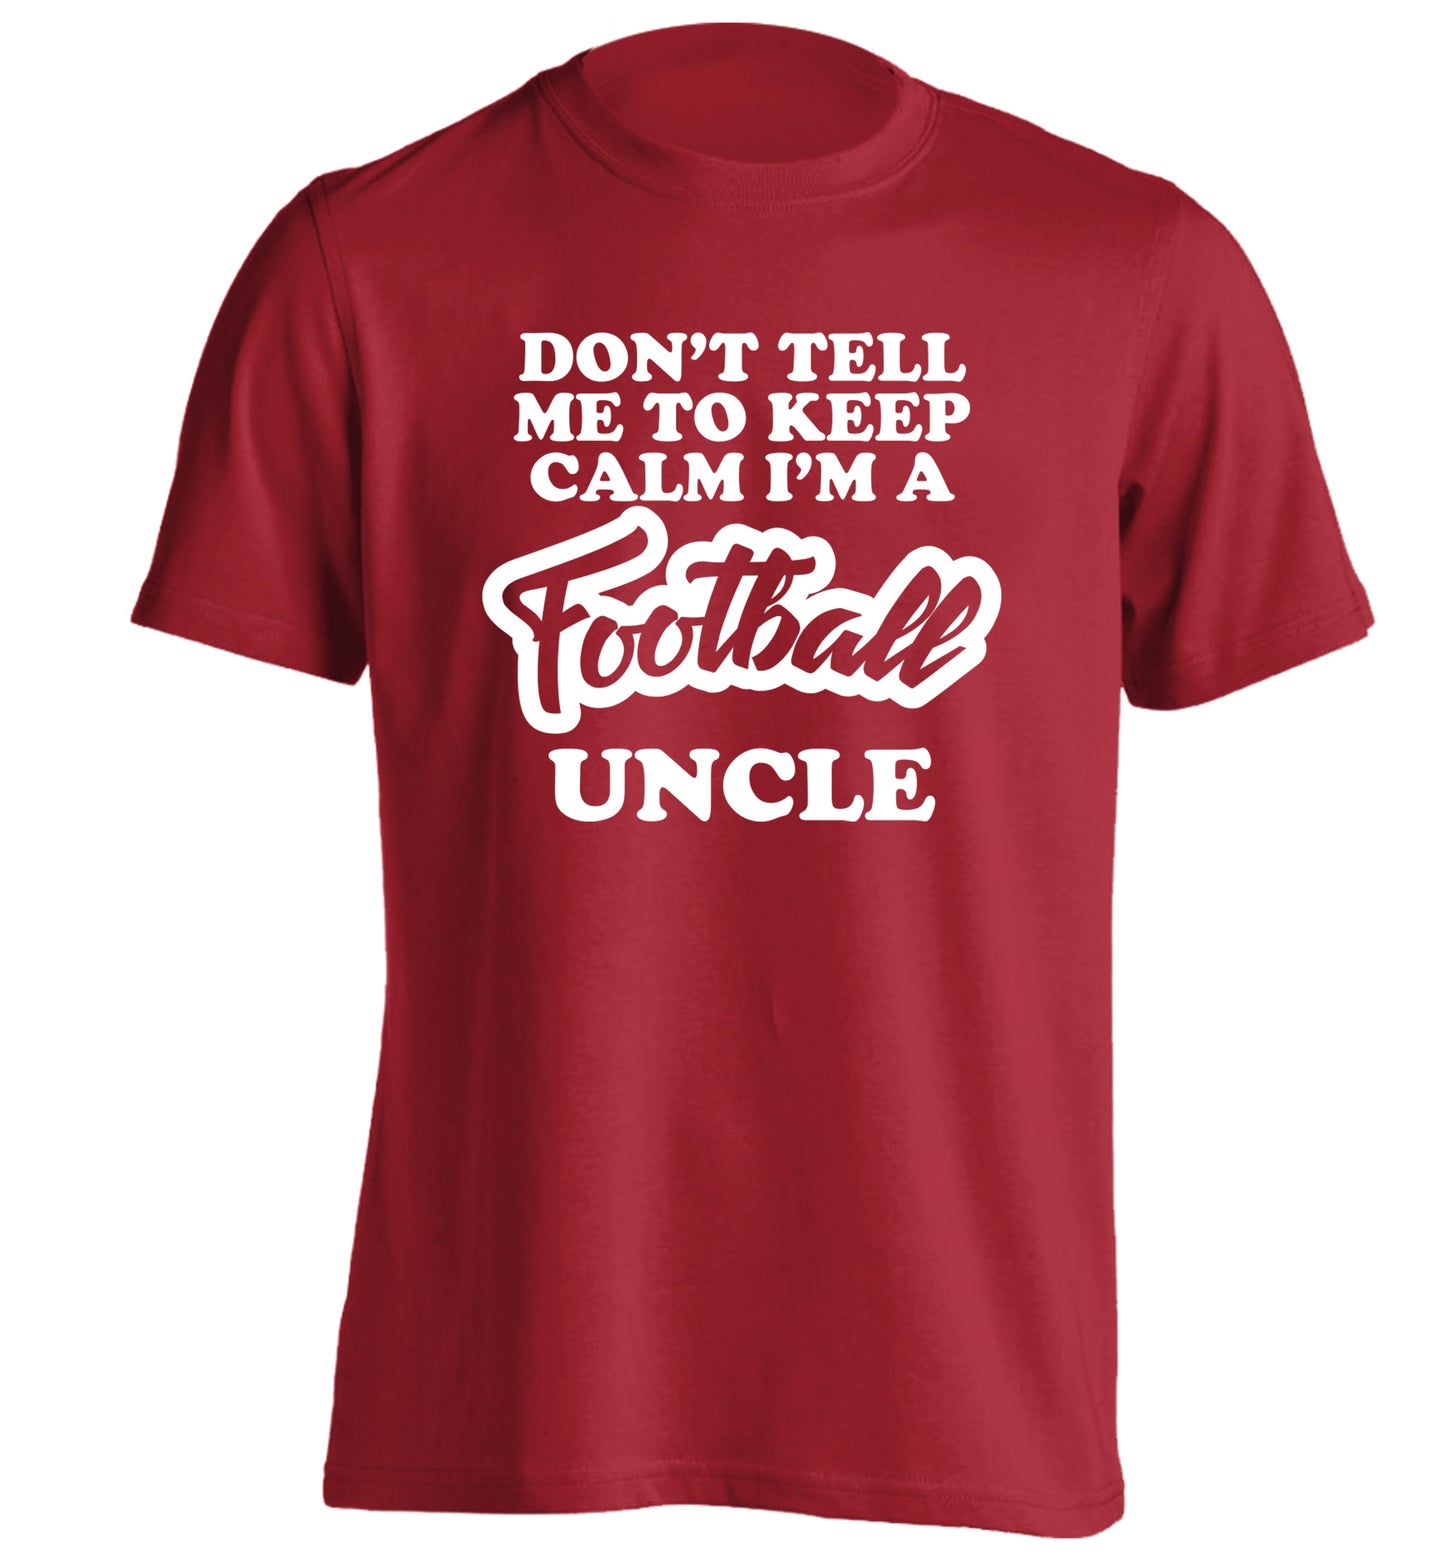 Don't tell me to keep calm I'm a football uncle adults unisexred Tshirt 2XL